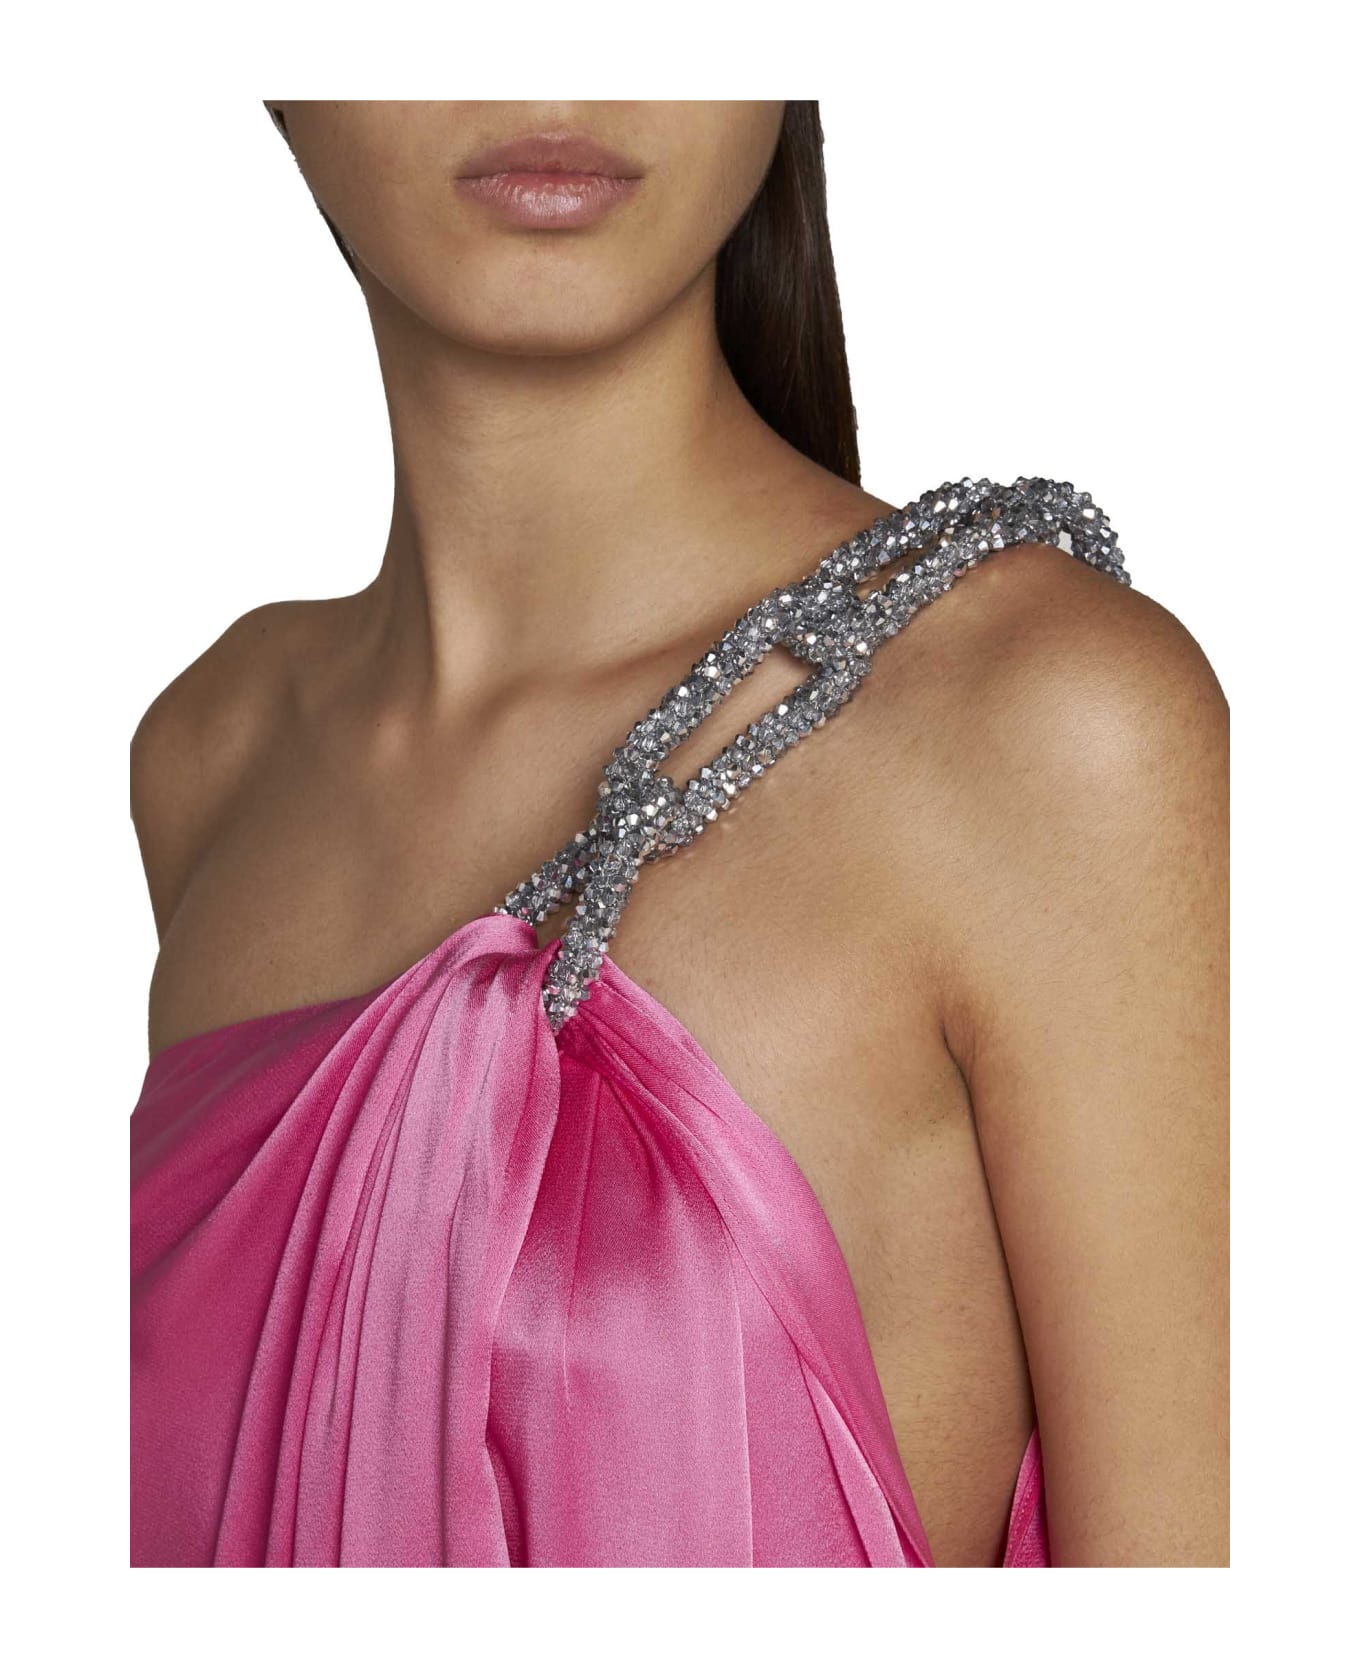 Stella McCartney One-shoulder Maxi Dress With Crystal Chain In Double Satin - Bright Pink ワンピース＆ドレス